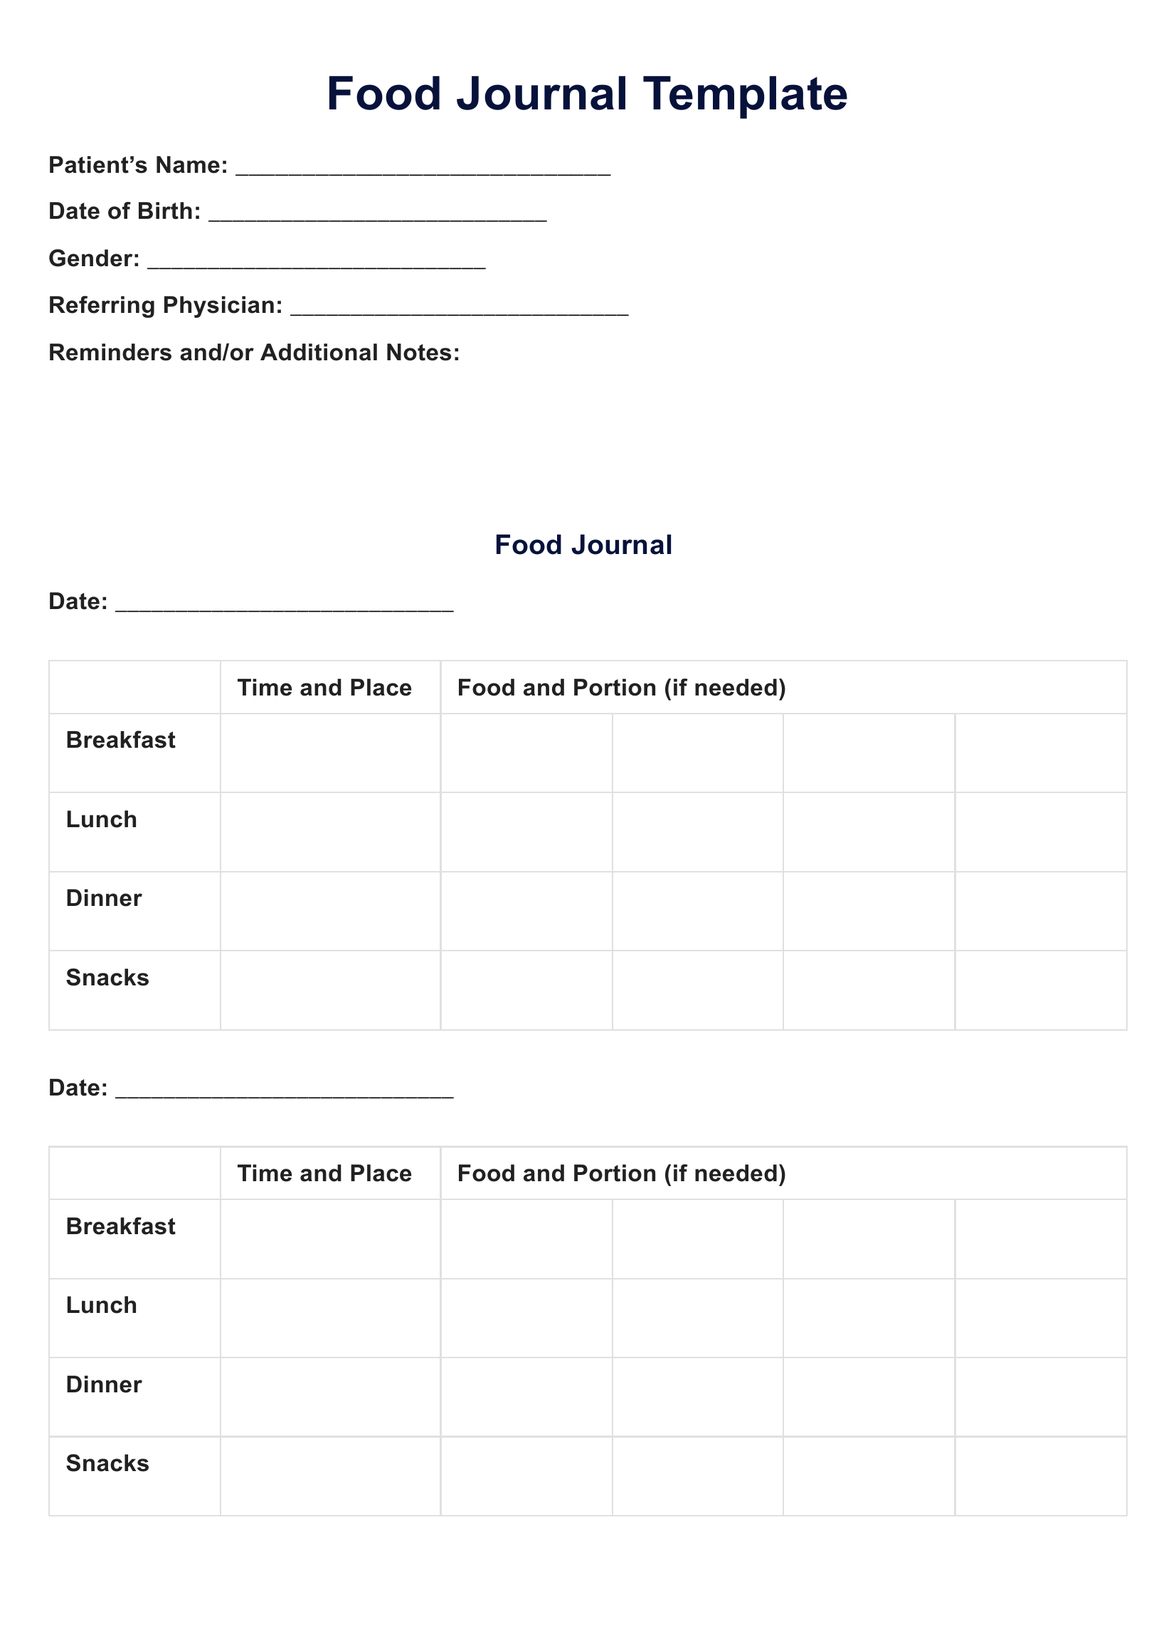 Food Journal Template PDF Example